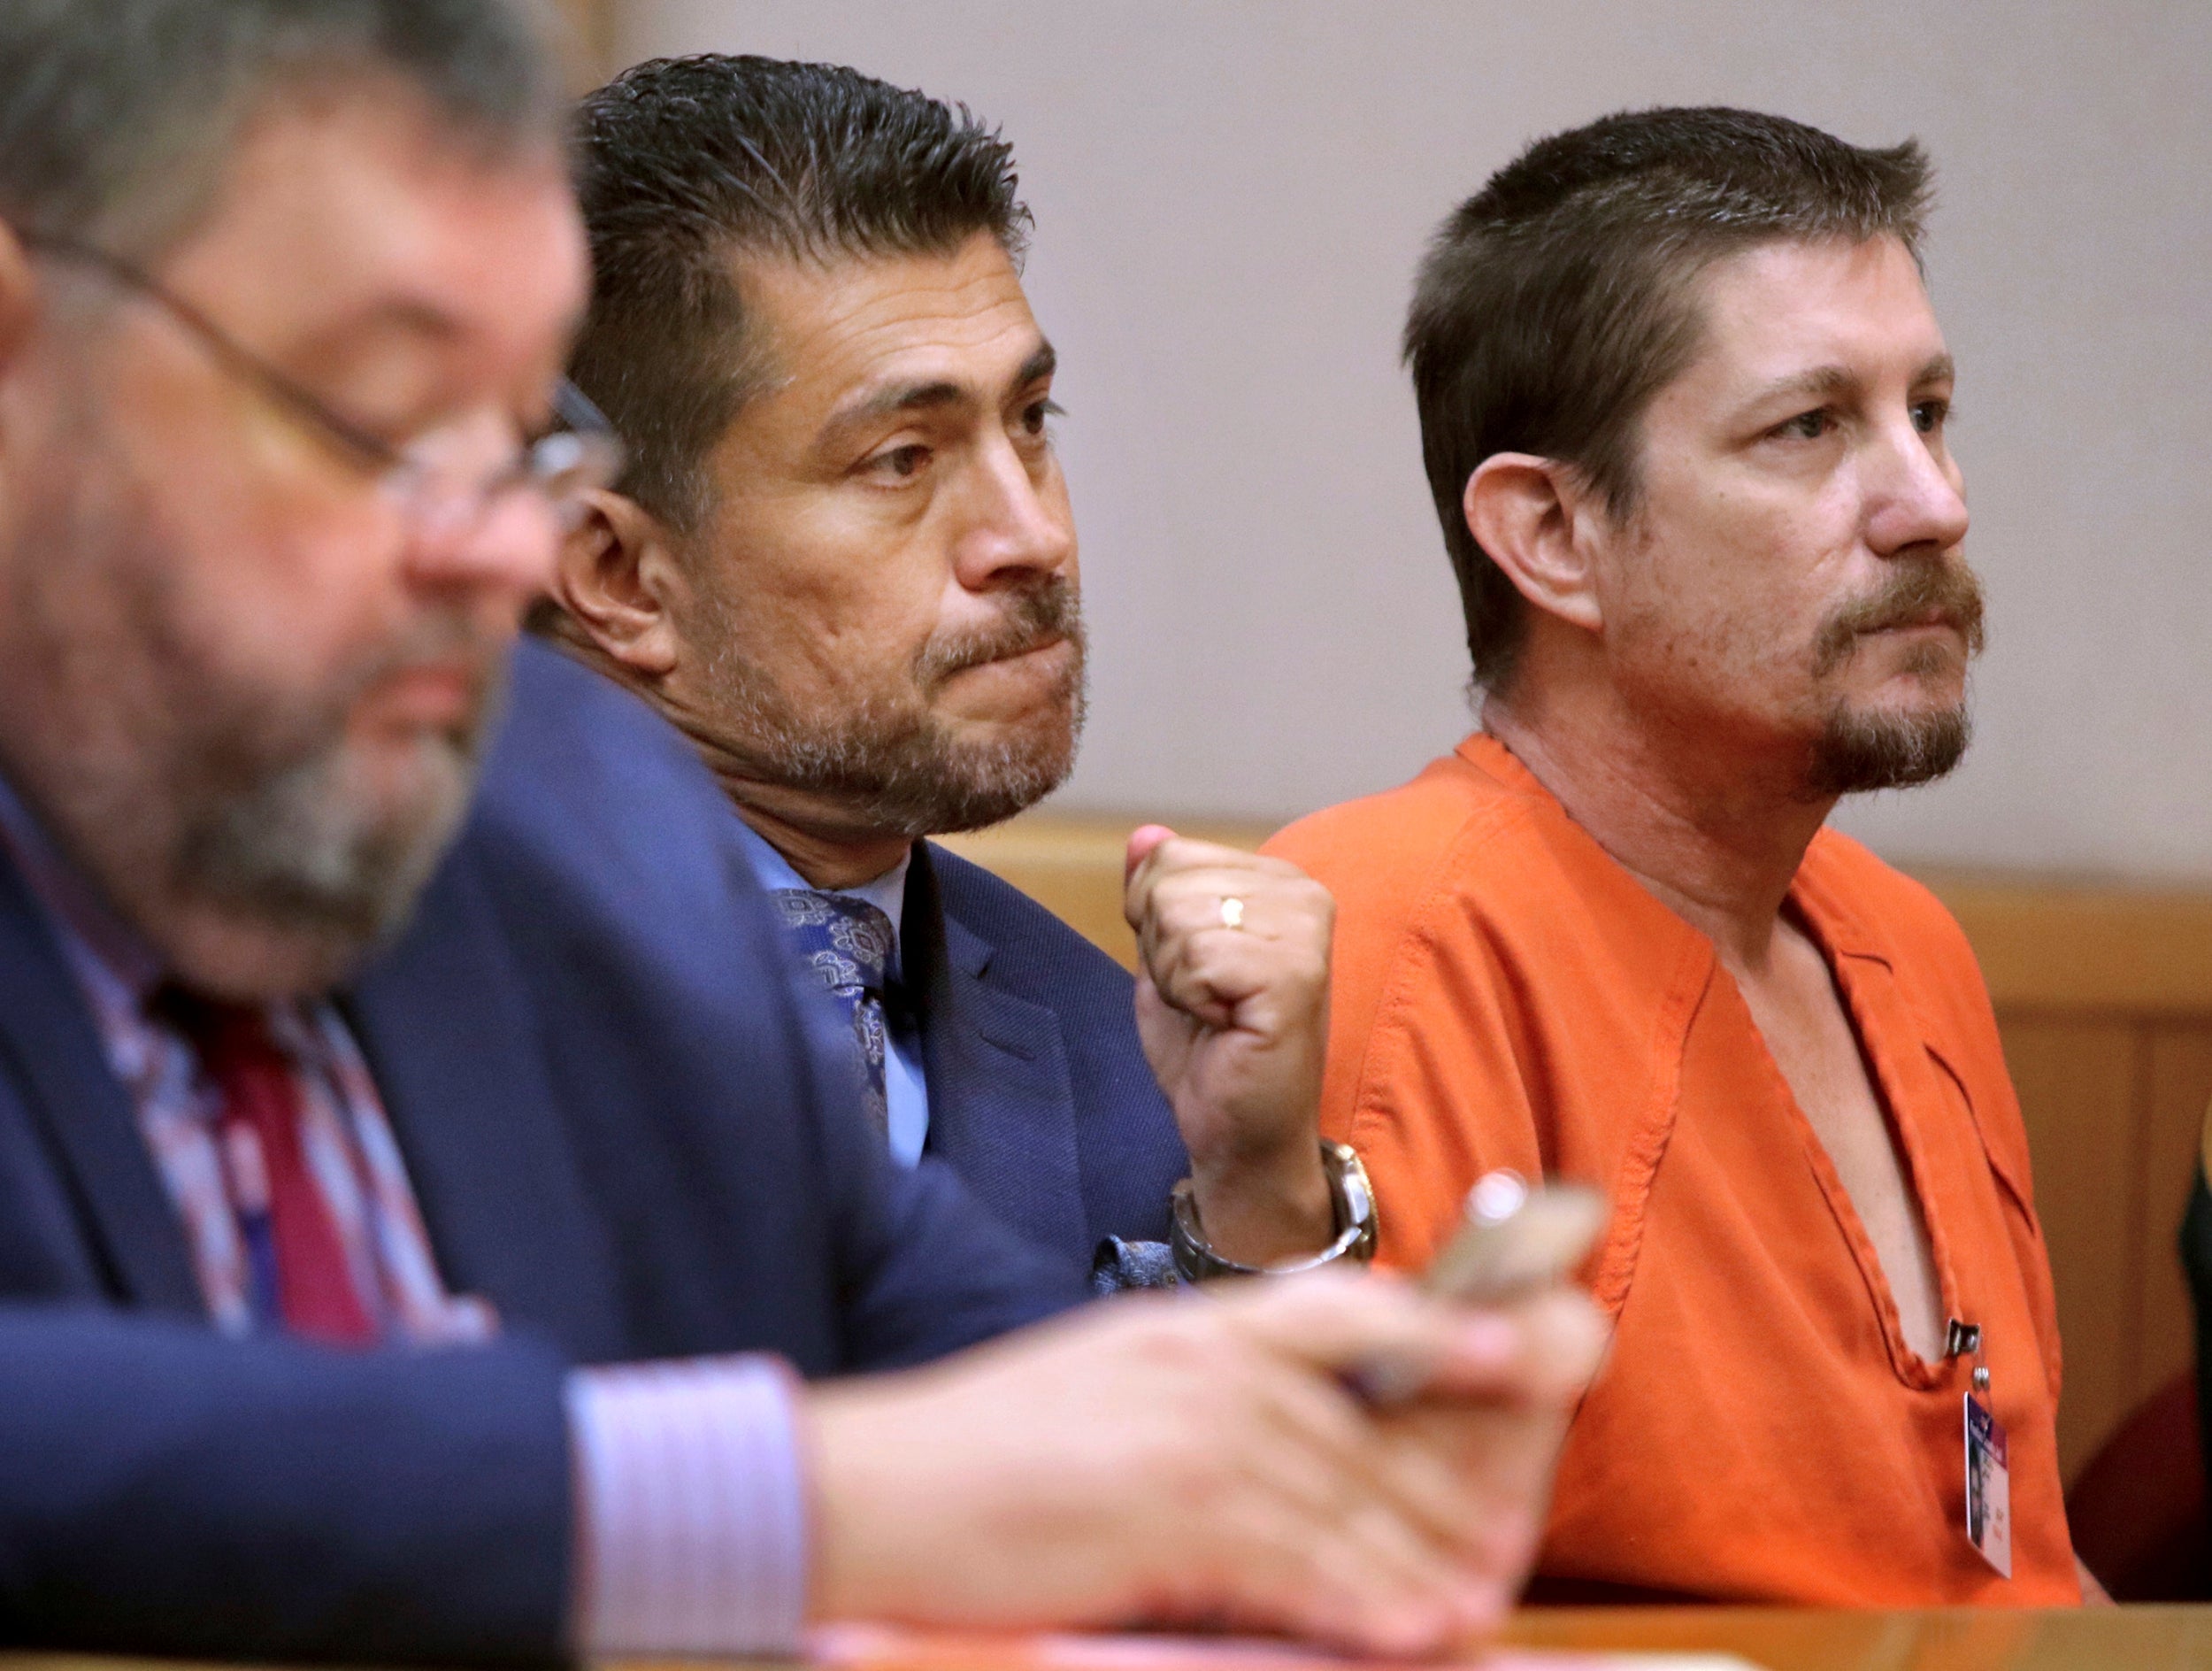 Michael Drejka, right, in a court appearance over the shooting of Markeis McGlockton in Clearwater, Florida